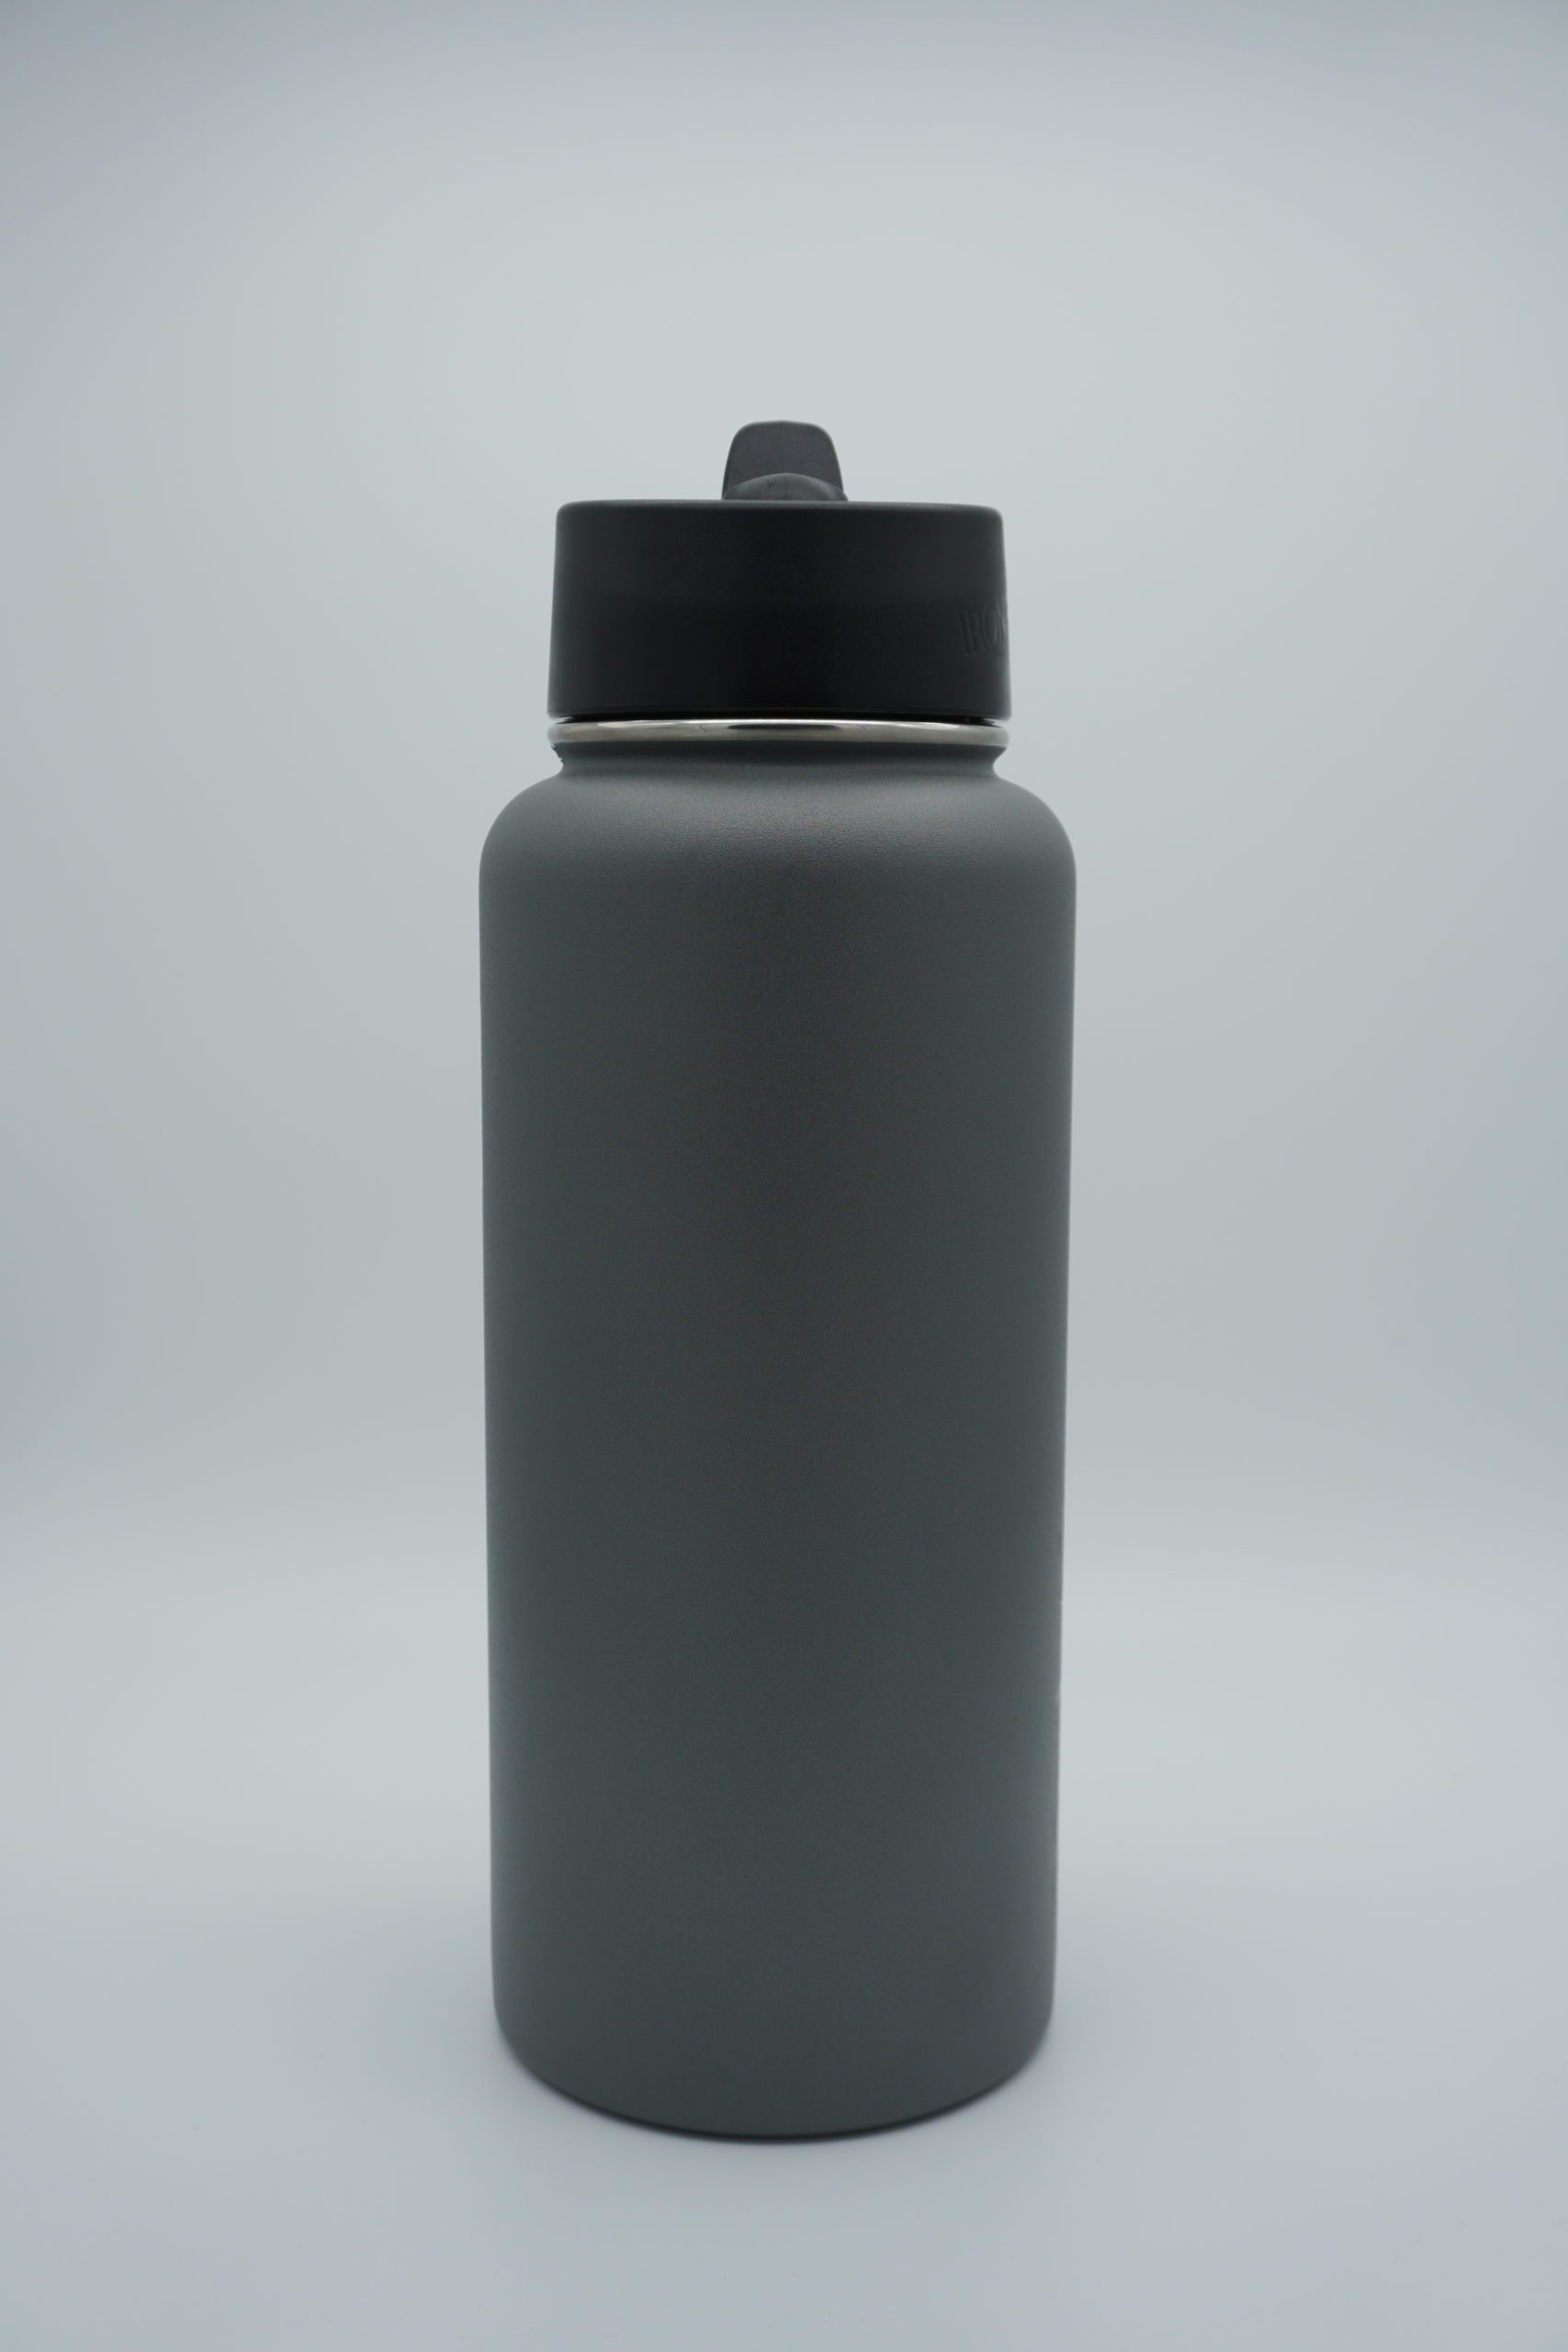 Iron Flask 18oz Water Bottle - 3 lids - Review & Test 